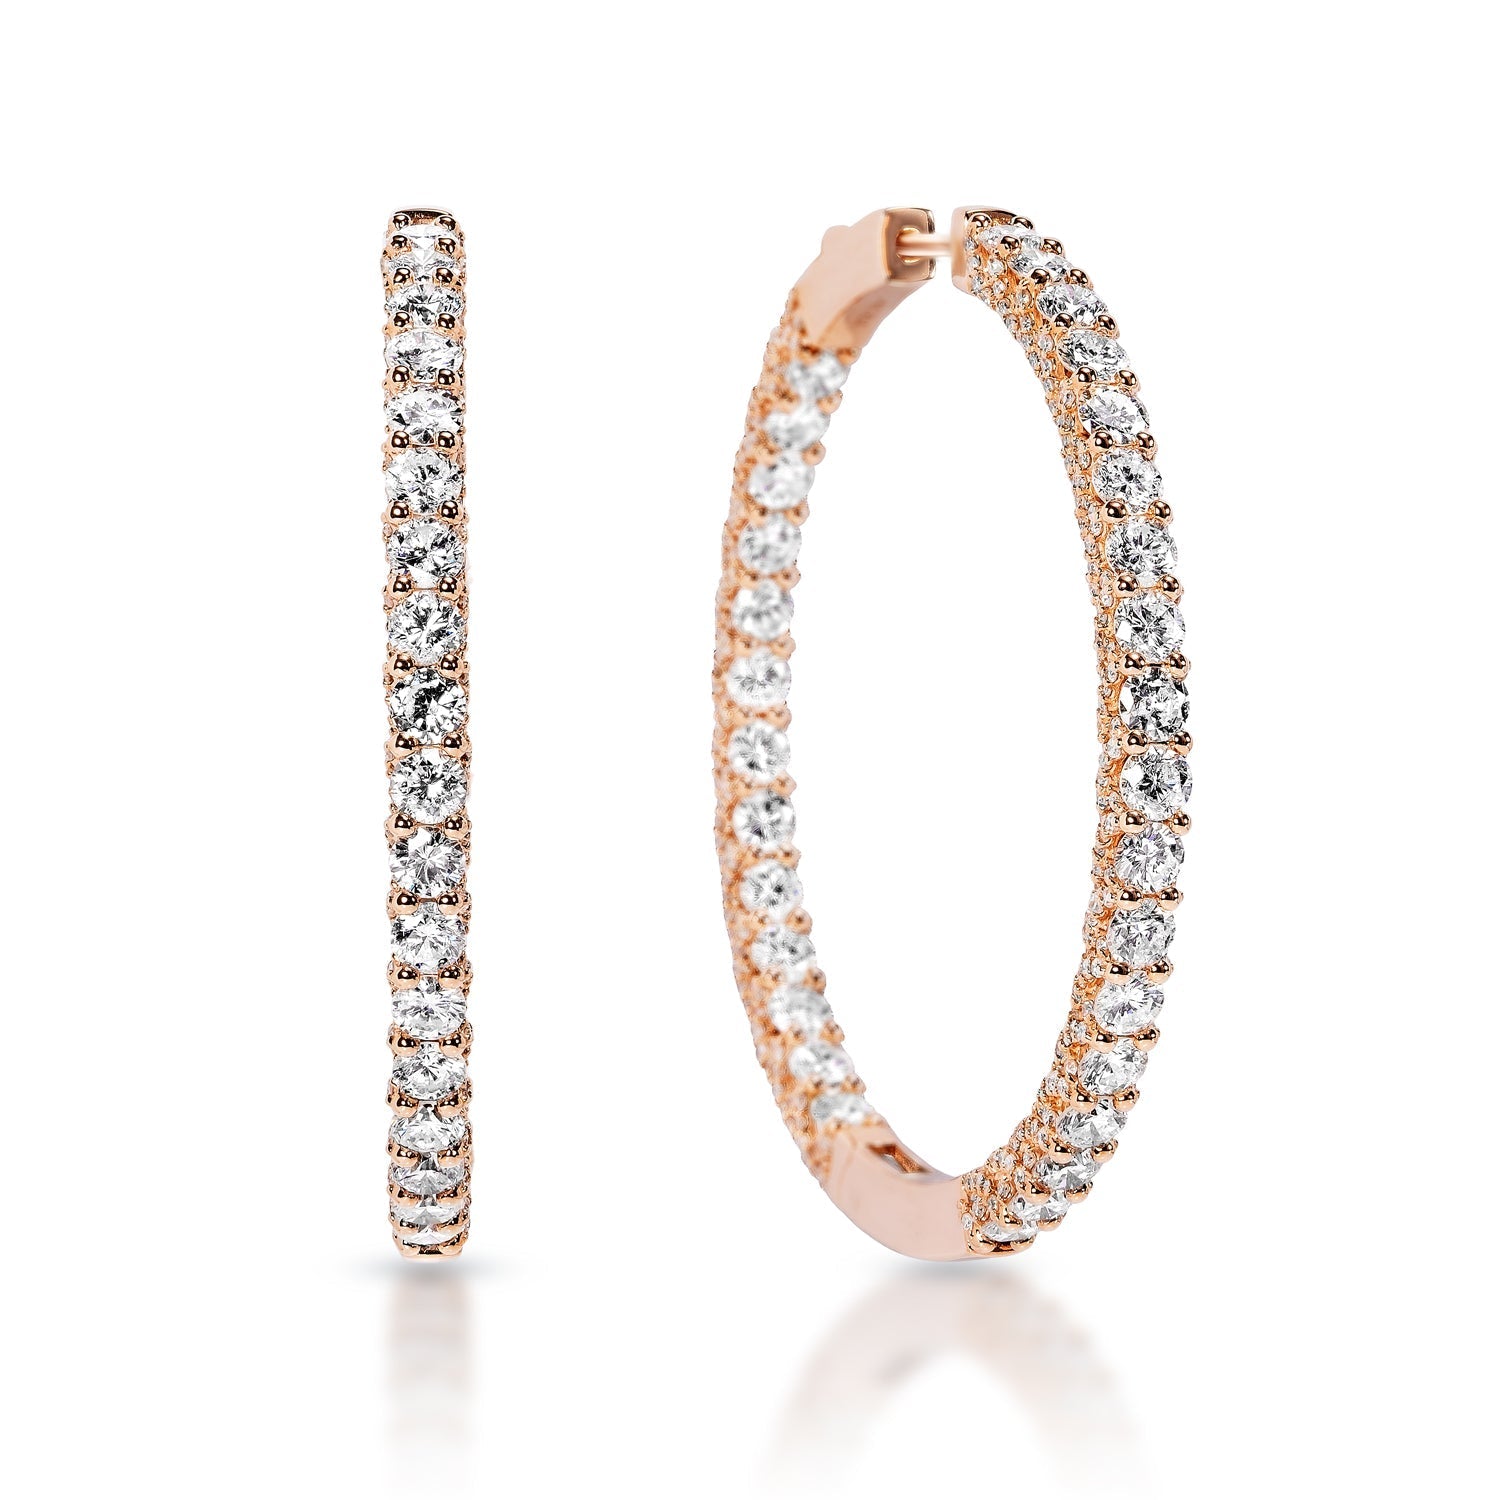 Sydnee 9 Carat Round Brilliant Diamond Hoop Earrings in 14k Rose Gold Front and Side View